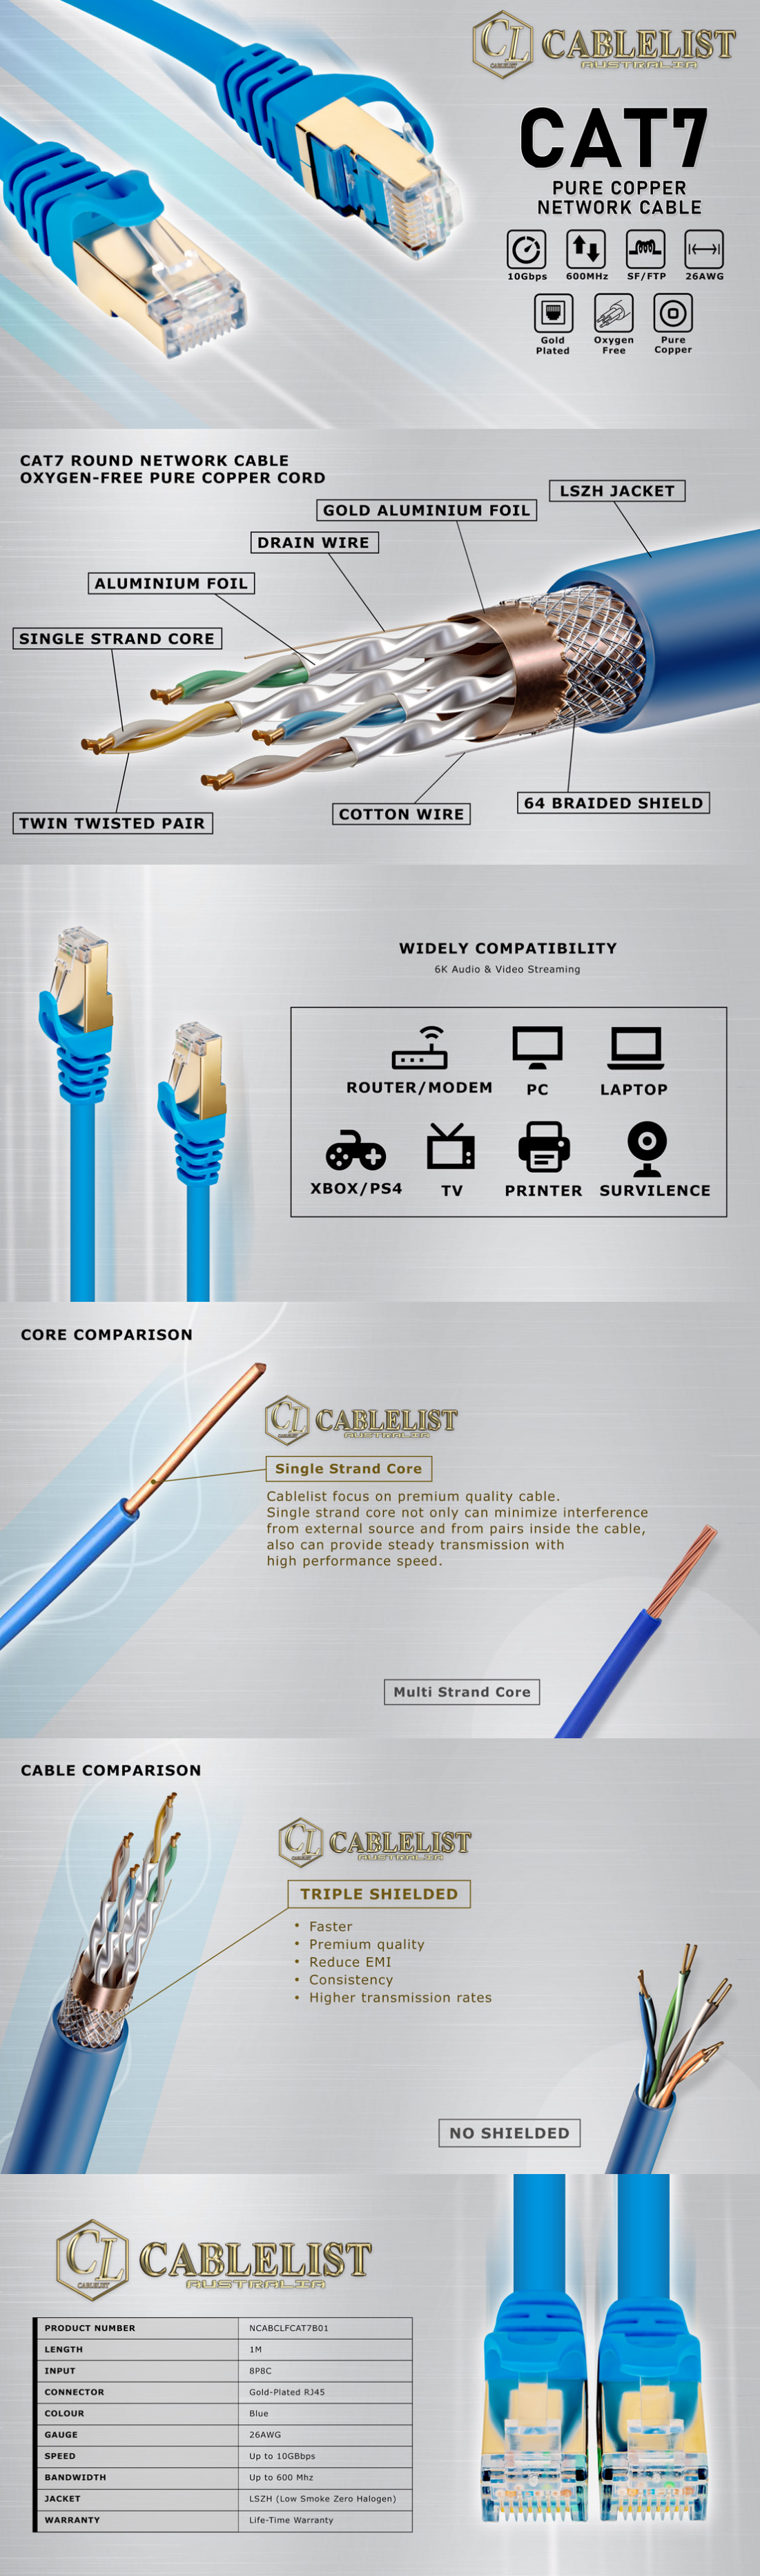 Fishing-Reels-Cablelist-CAT7-Blue-1Meter-SF-FTP-RJ45-Ethernet-Network-Cable-1